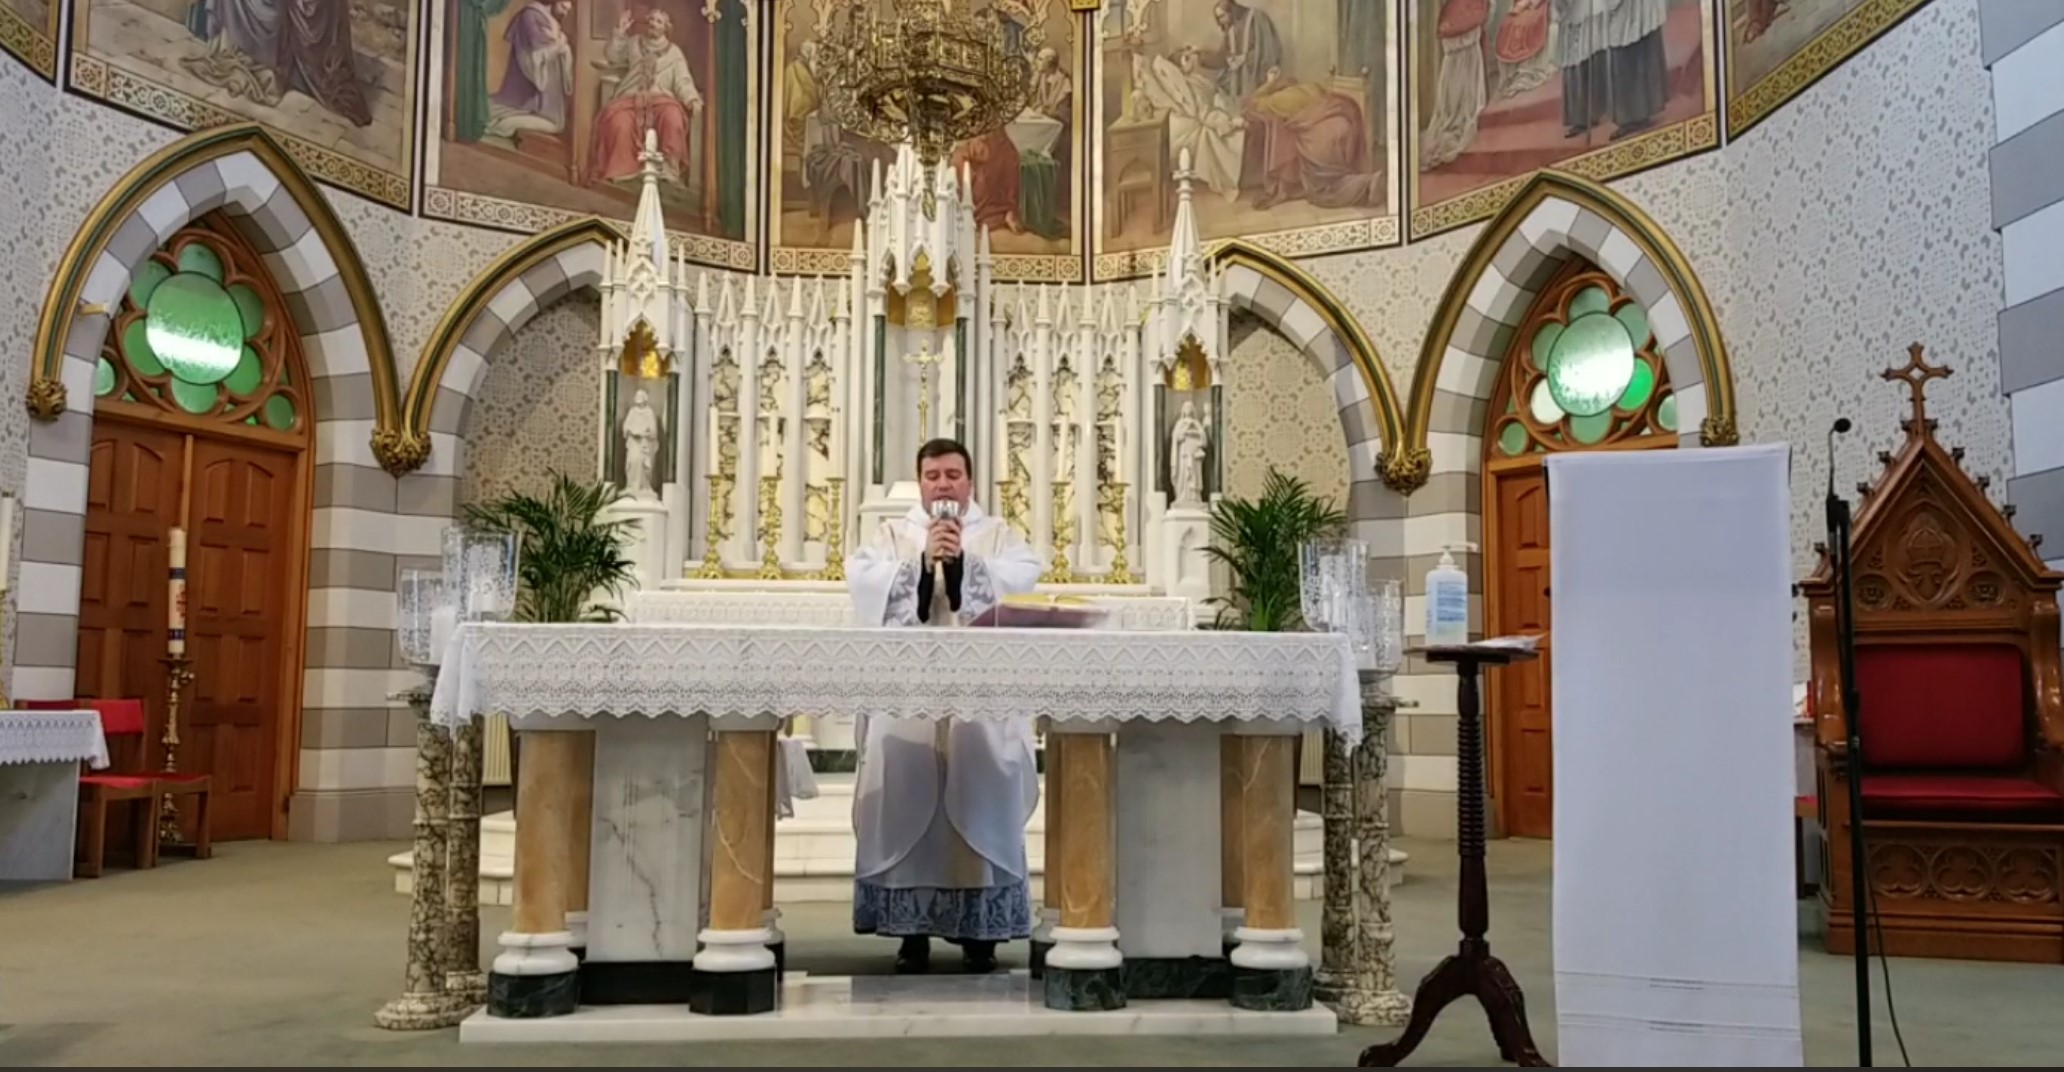 Father Willyans blessing the chalice at the altar